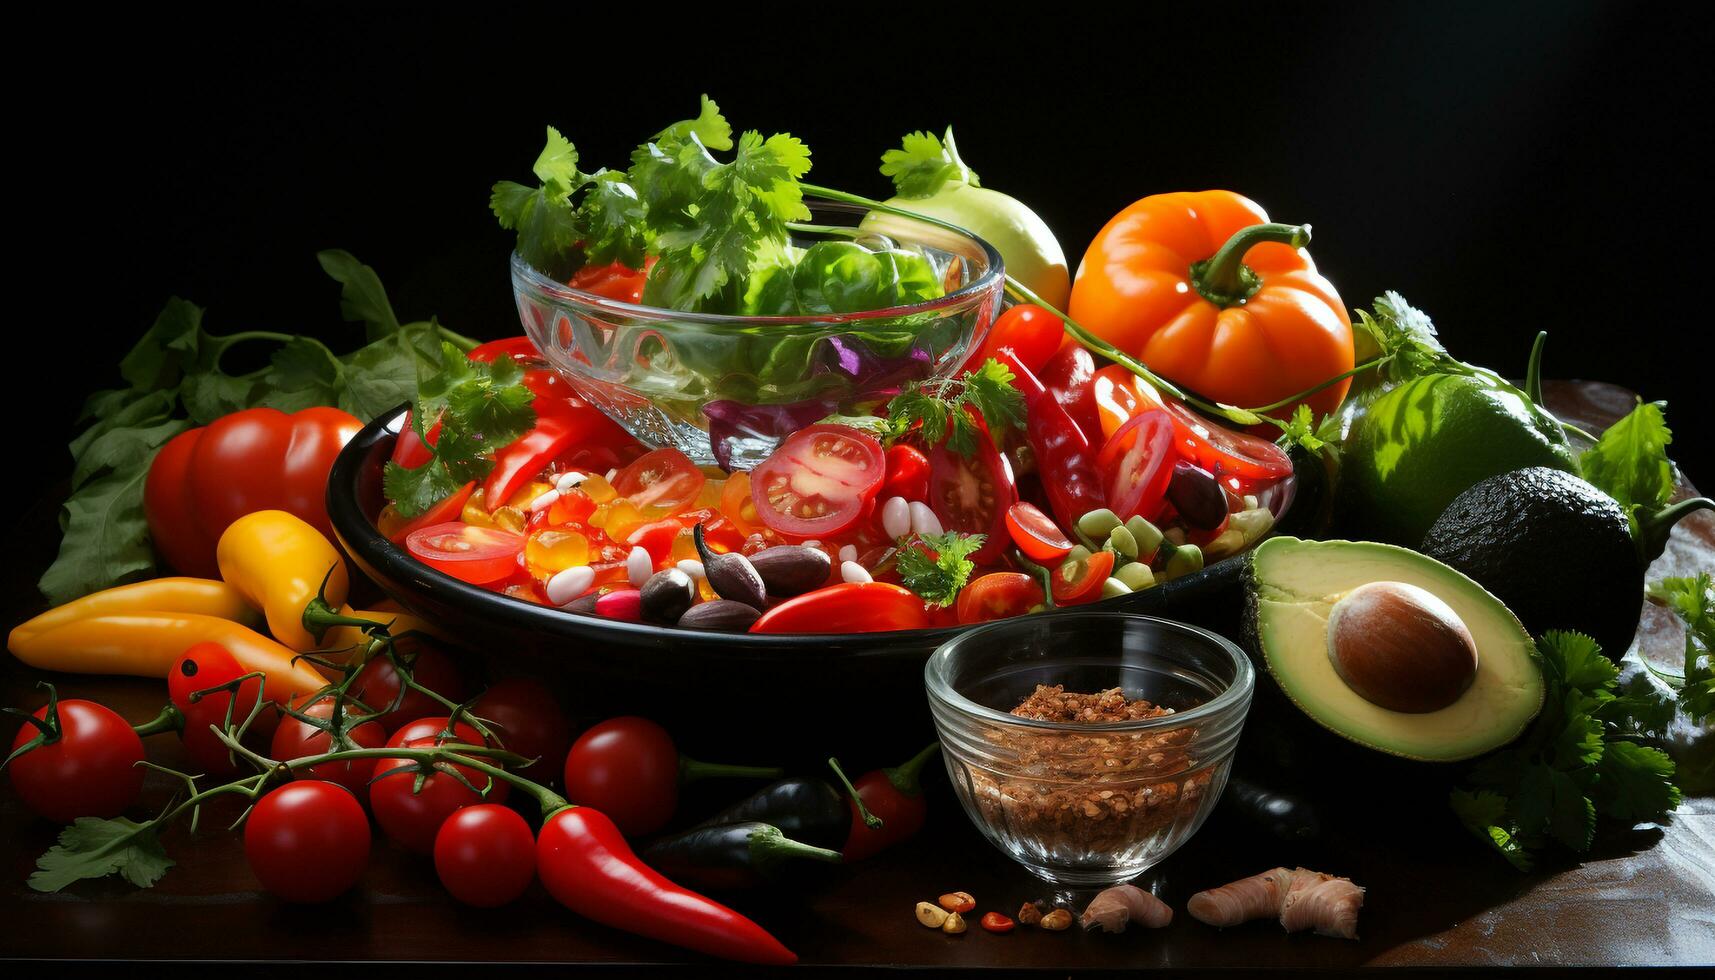 Freshness and variety on a wooden table  tomato, vegetable, salad, avocado, pepper, onion, leaf, cucumber, parsley, carrot generated by AI photo